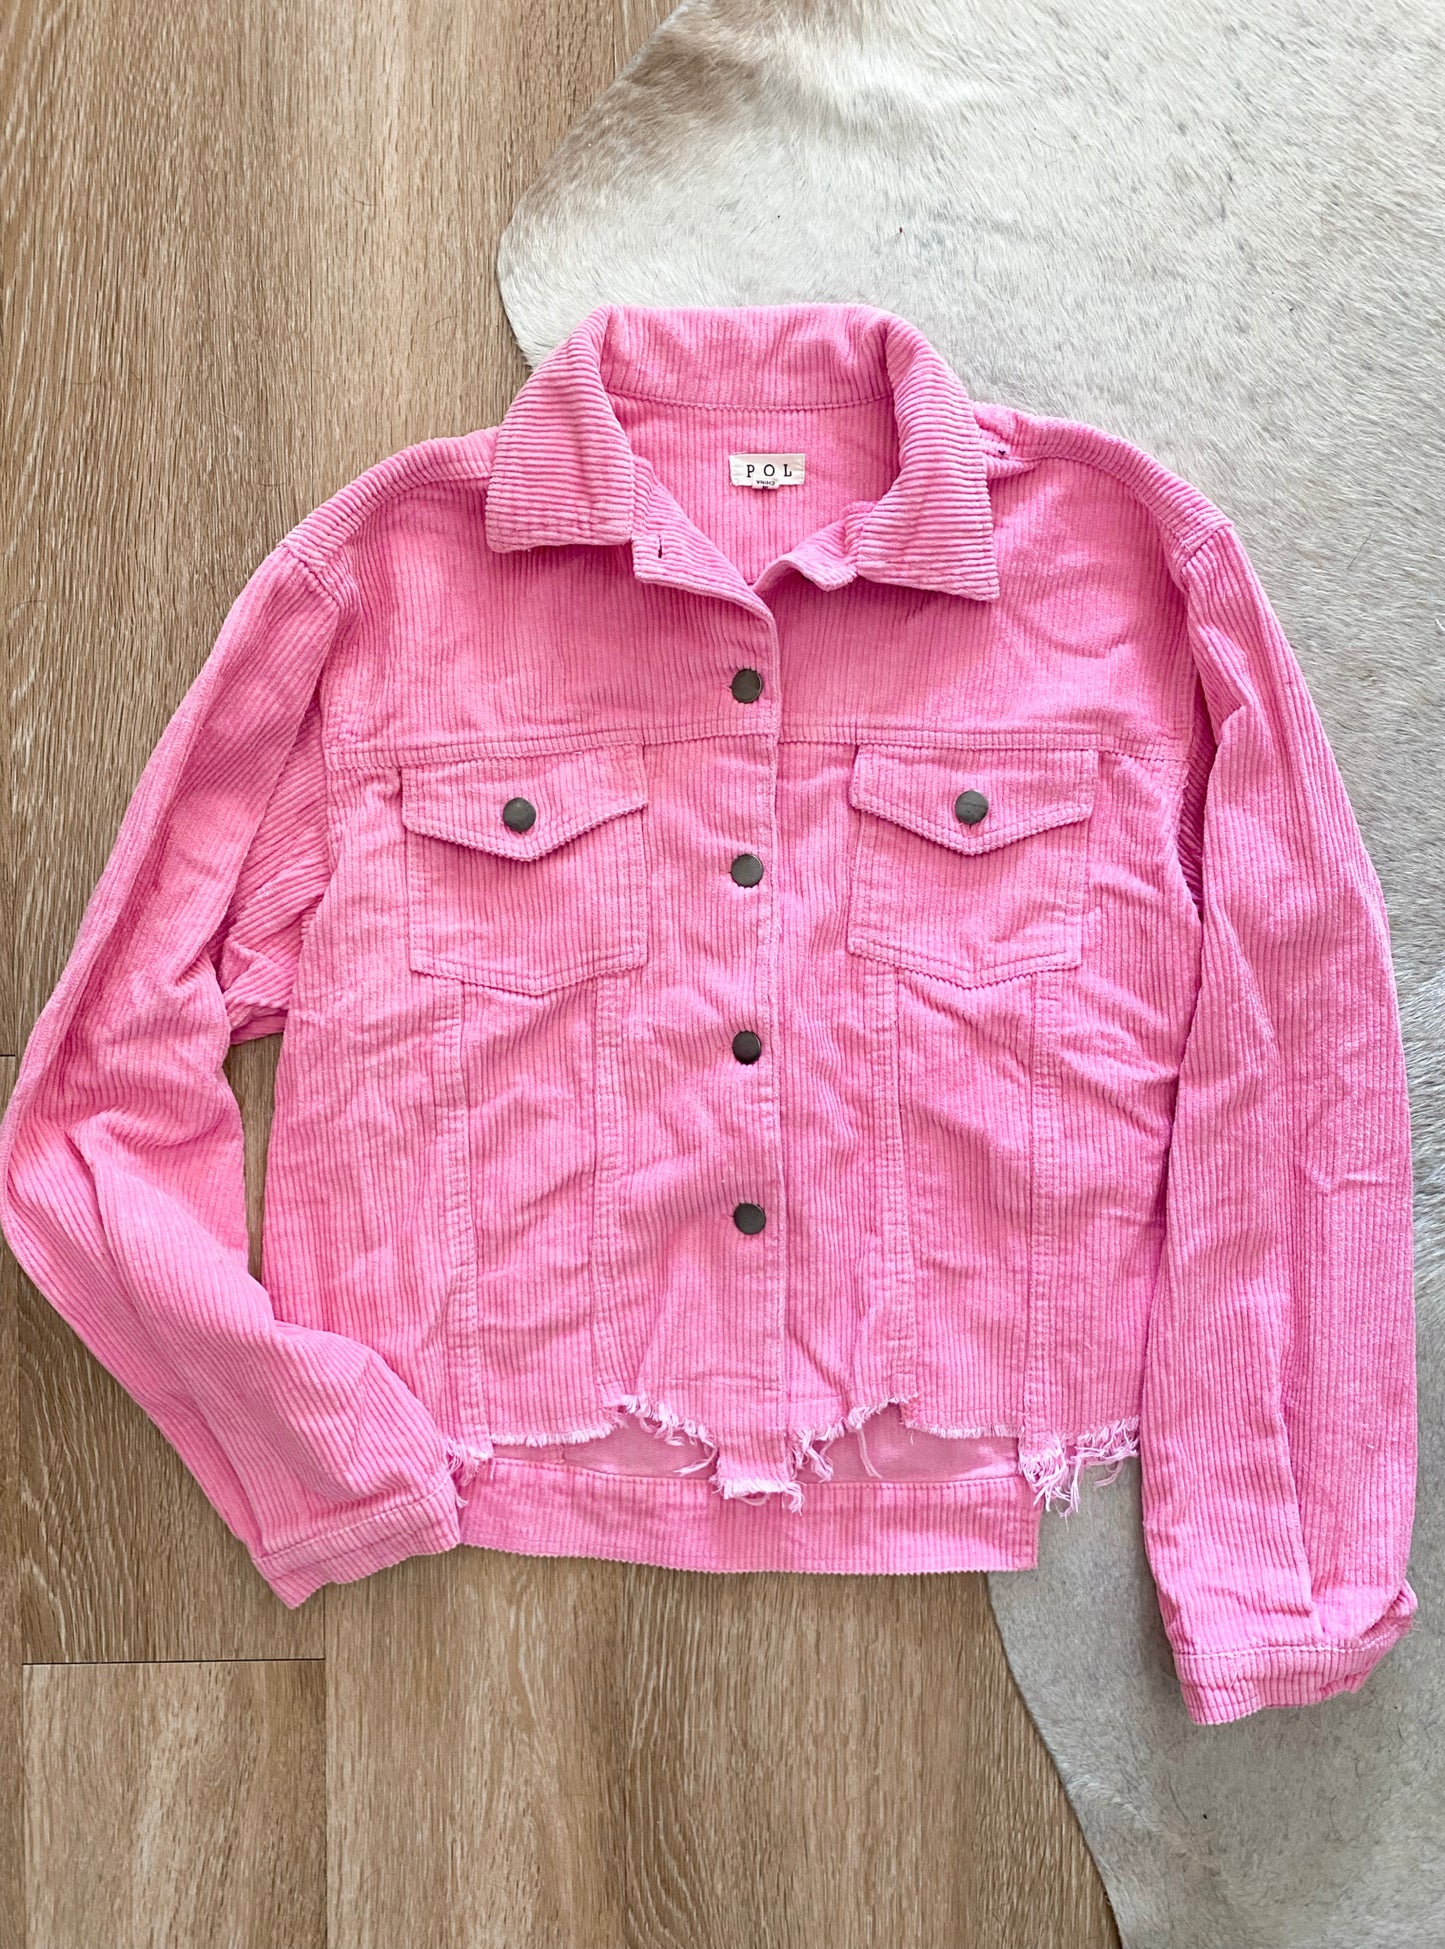 The Shania - Hot Pink Distressed Corduroy Jacket